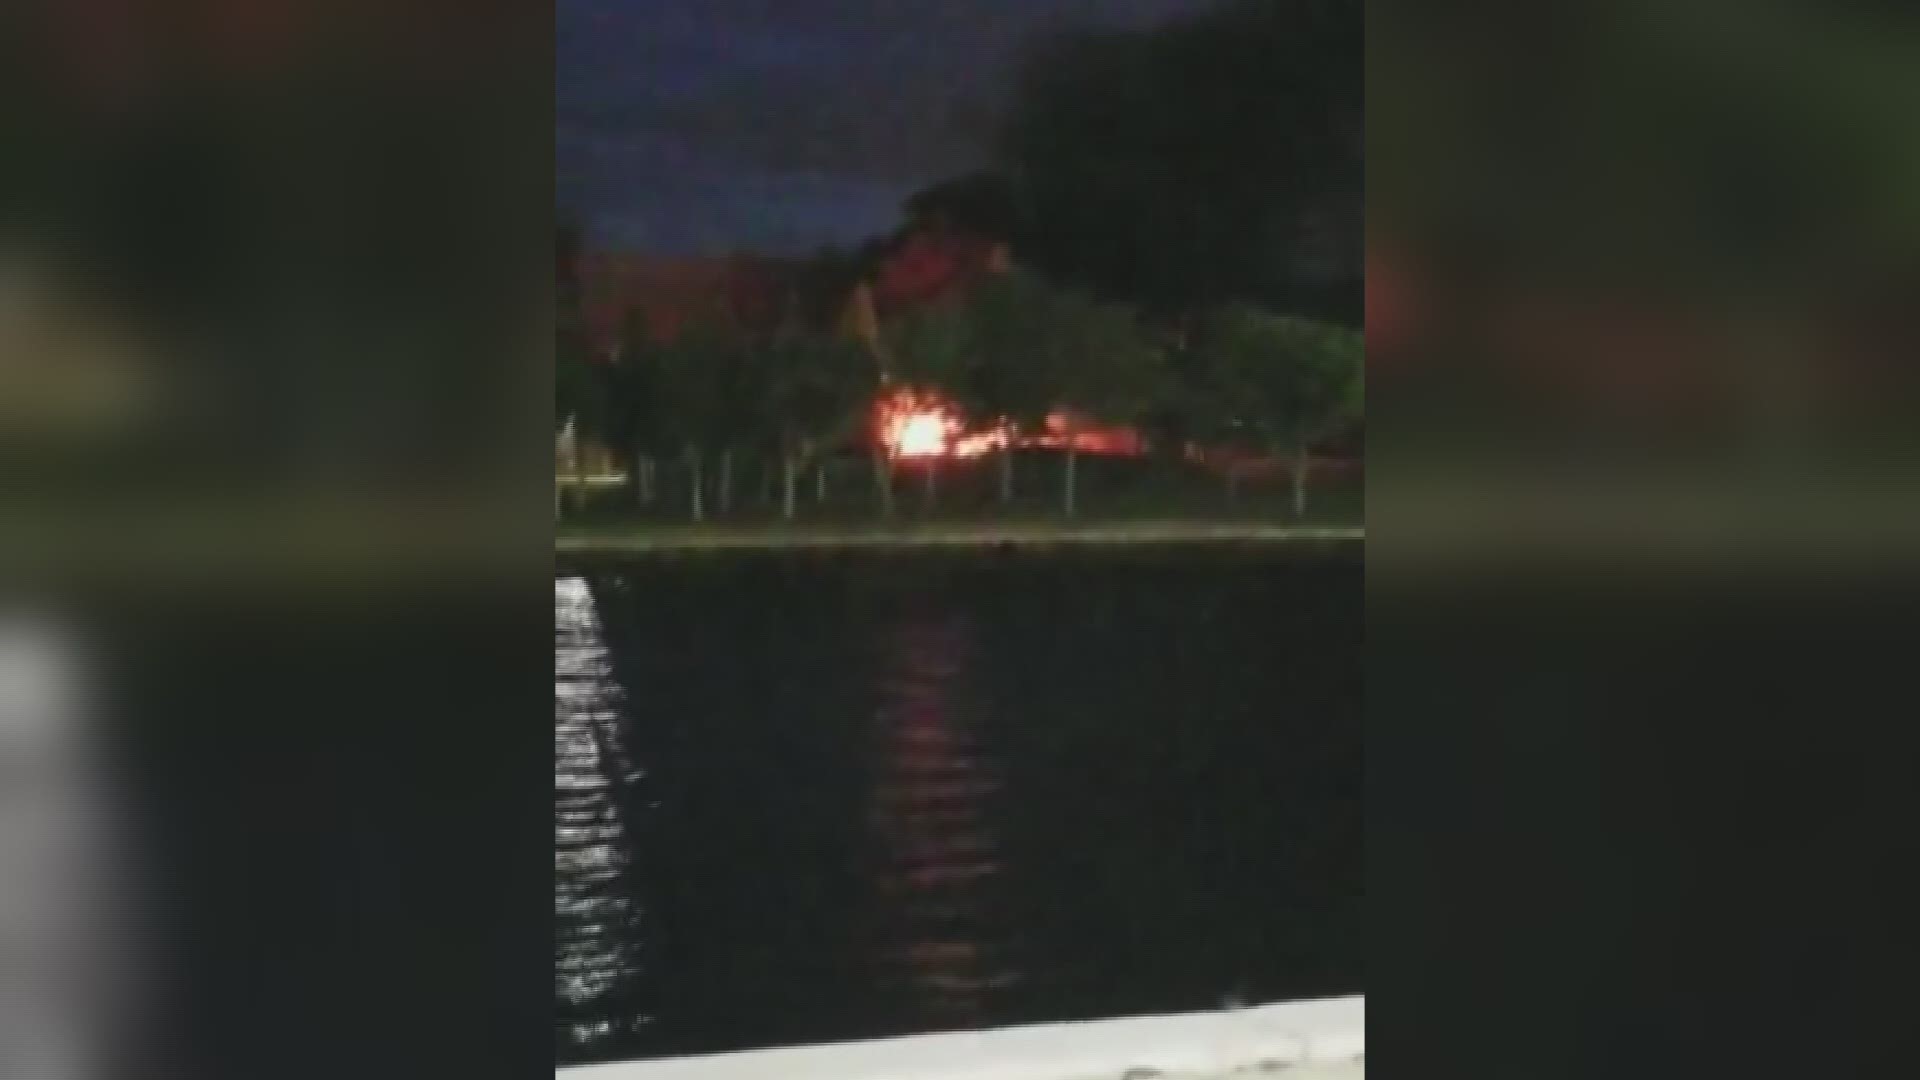 Tampa firefighters are working to put out a large fire at Howard W. Blake High School.